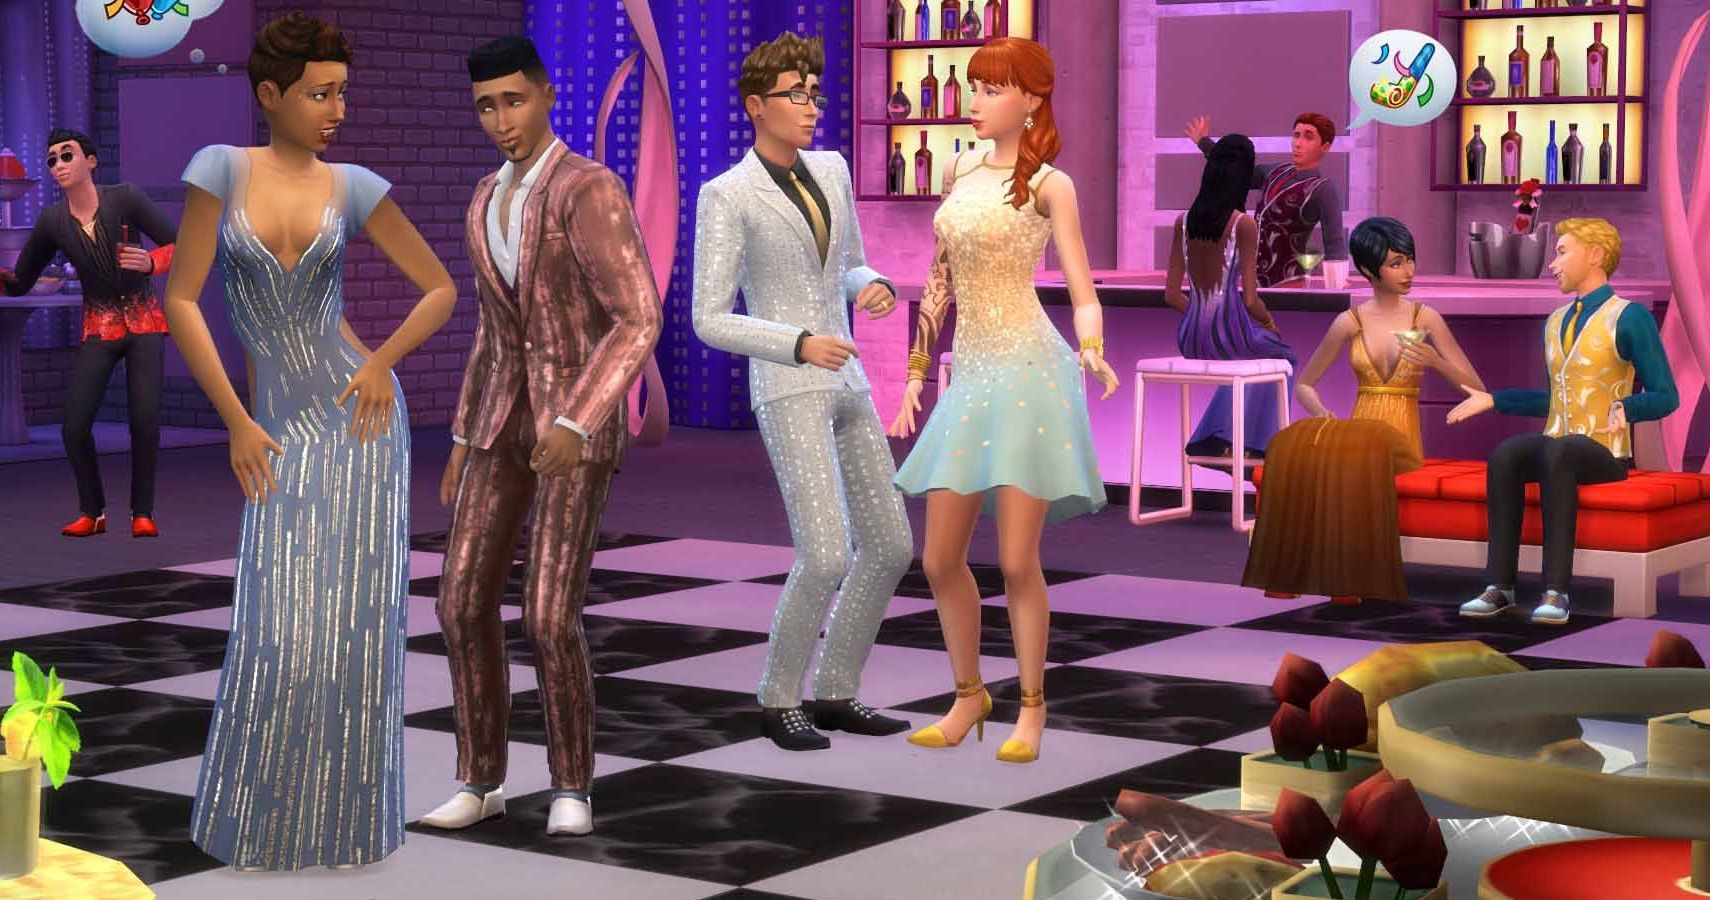 Dressed up Sims dancing at a party.